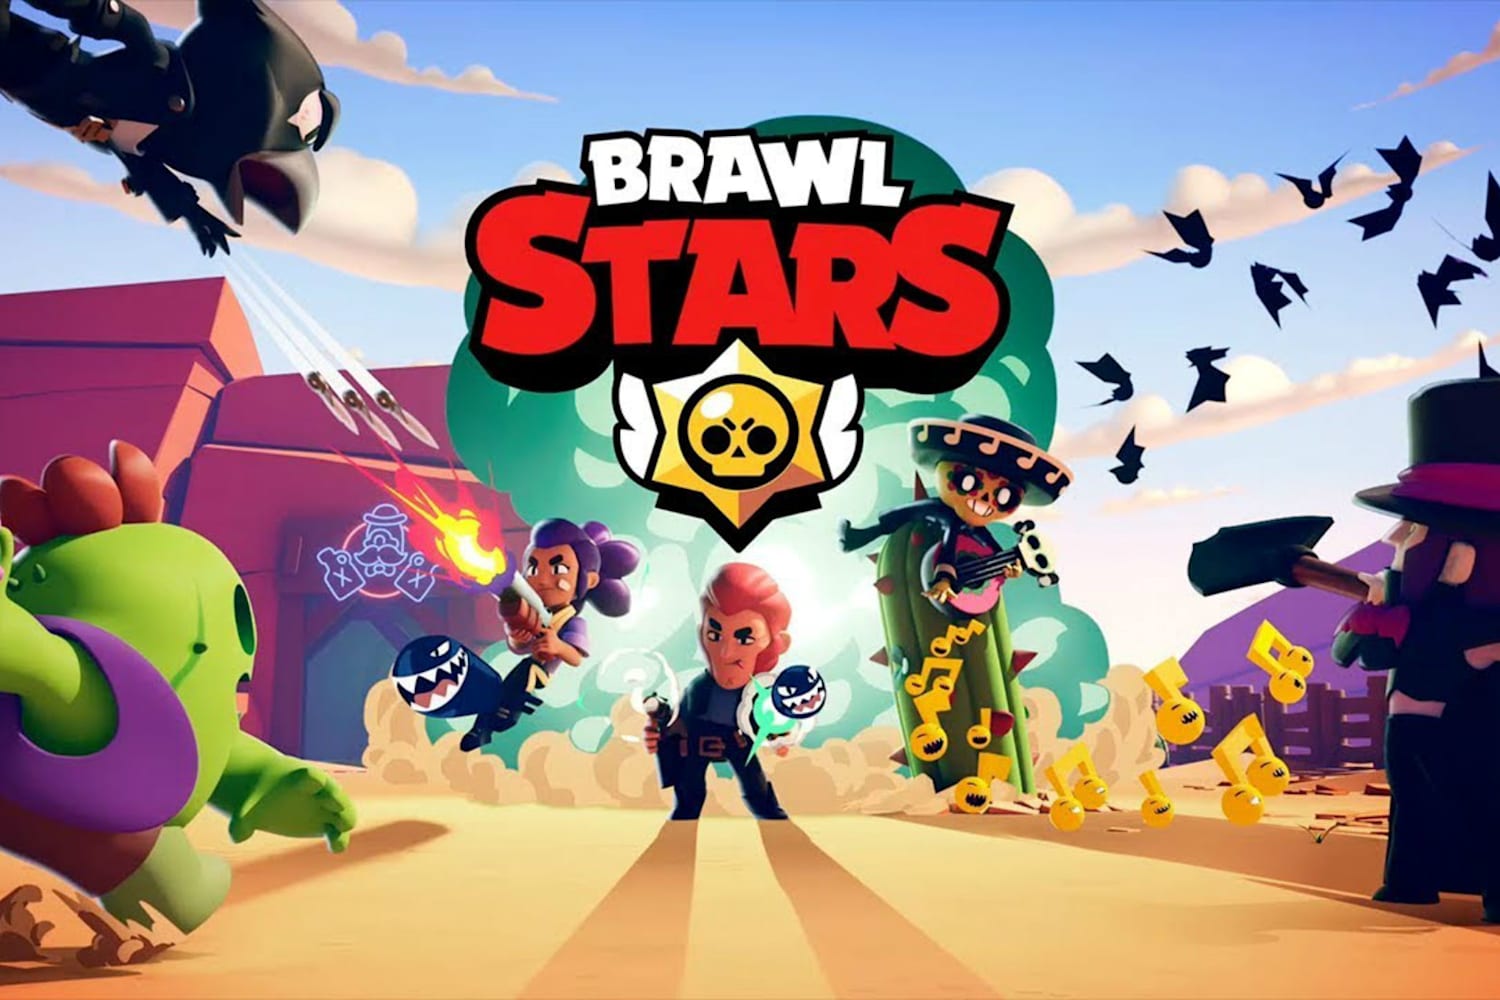 How To Get Into Brawl Stars A Beginner S Guide To 2020 - how to recover a brawl stars account